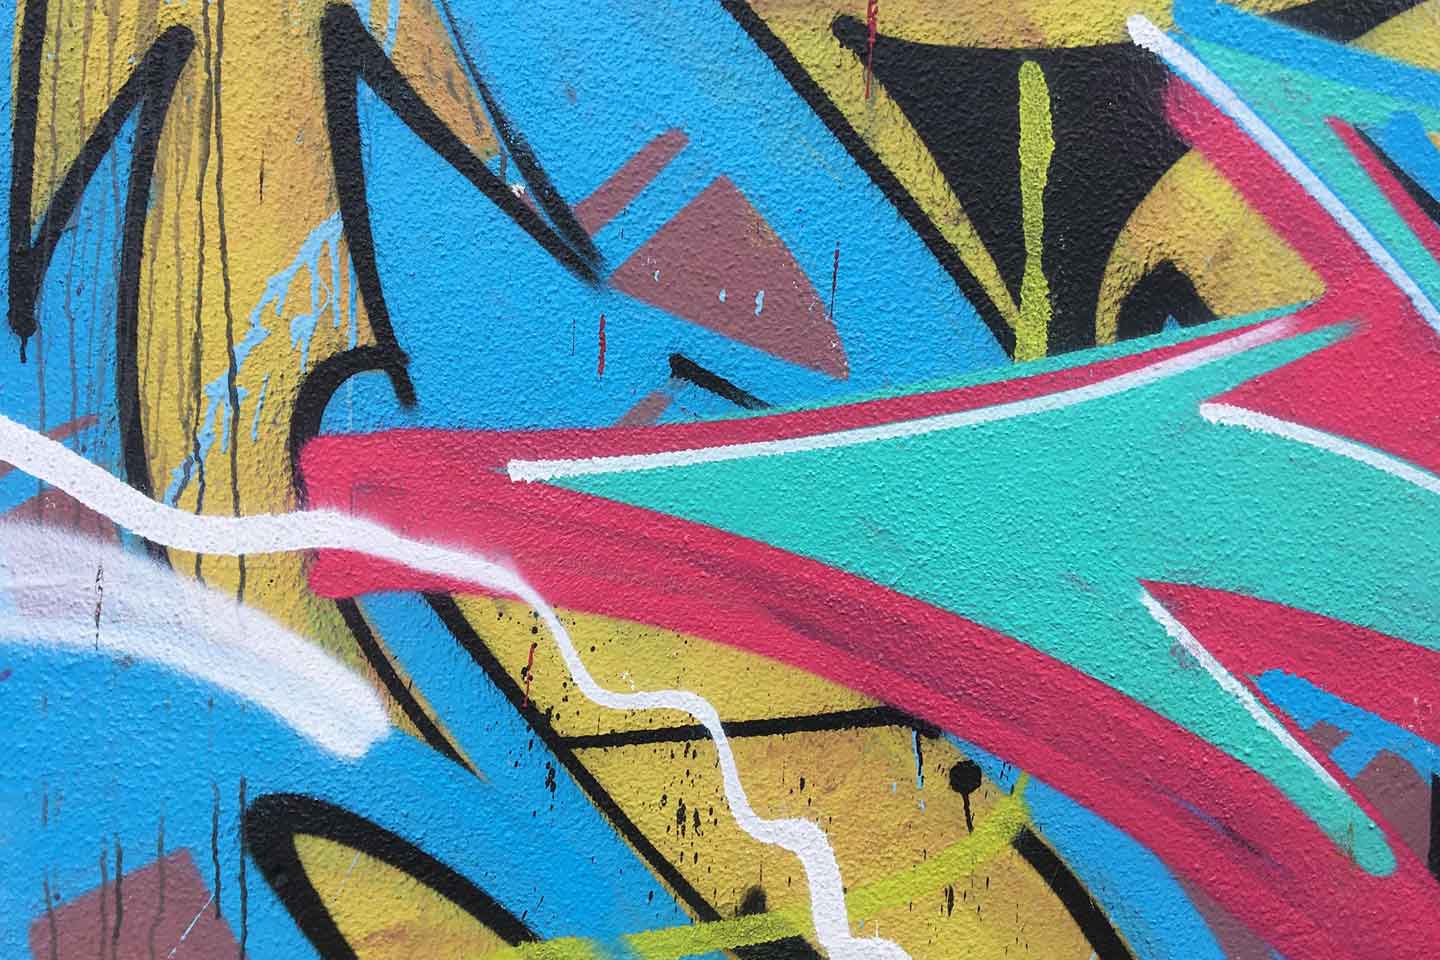 Olhao Street Art - turquoise, pink, blue and brown shapes